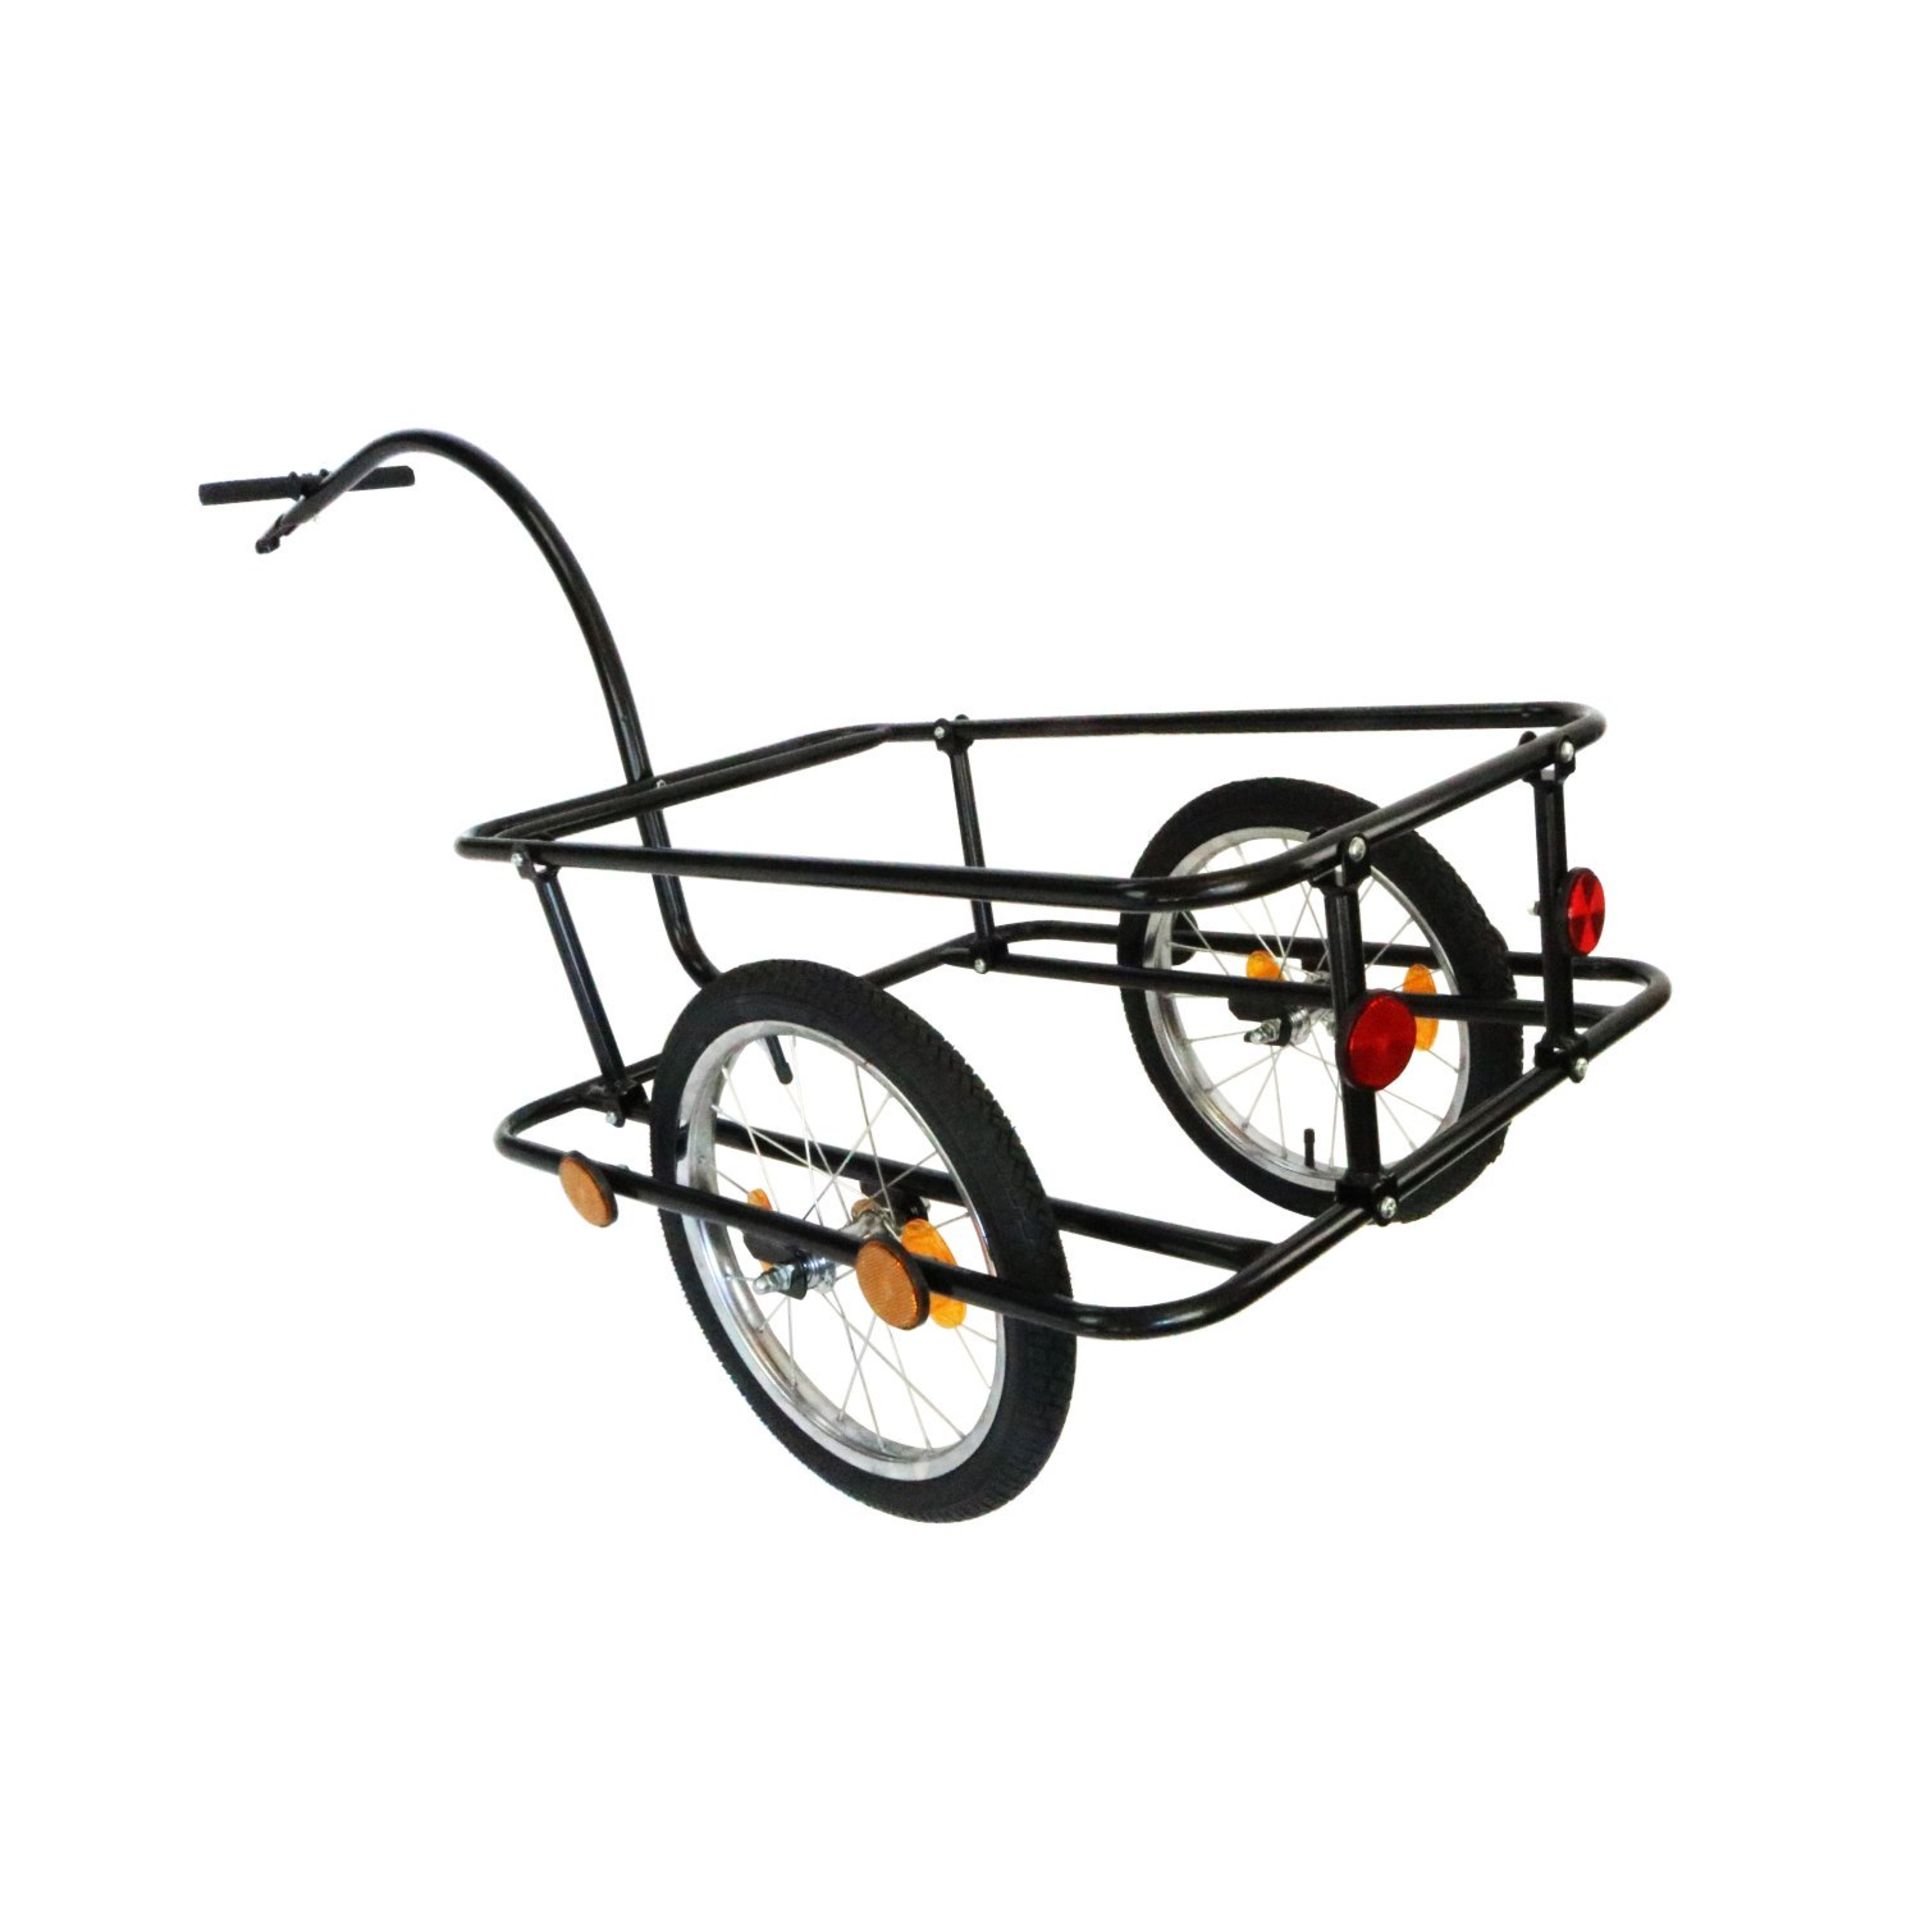 (LF183) Bike Trailer Trolley with Coupling & Pneumatic Tyre 90L Cargo The bike trailer is ... - Image 2 of 2